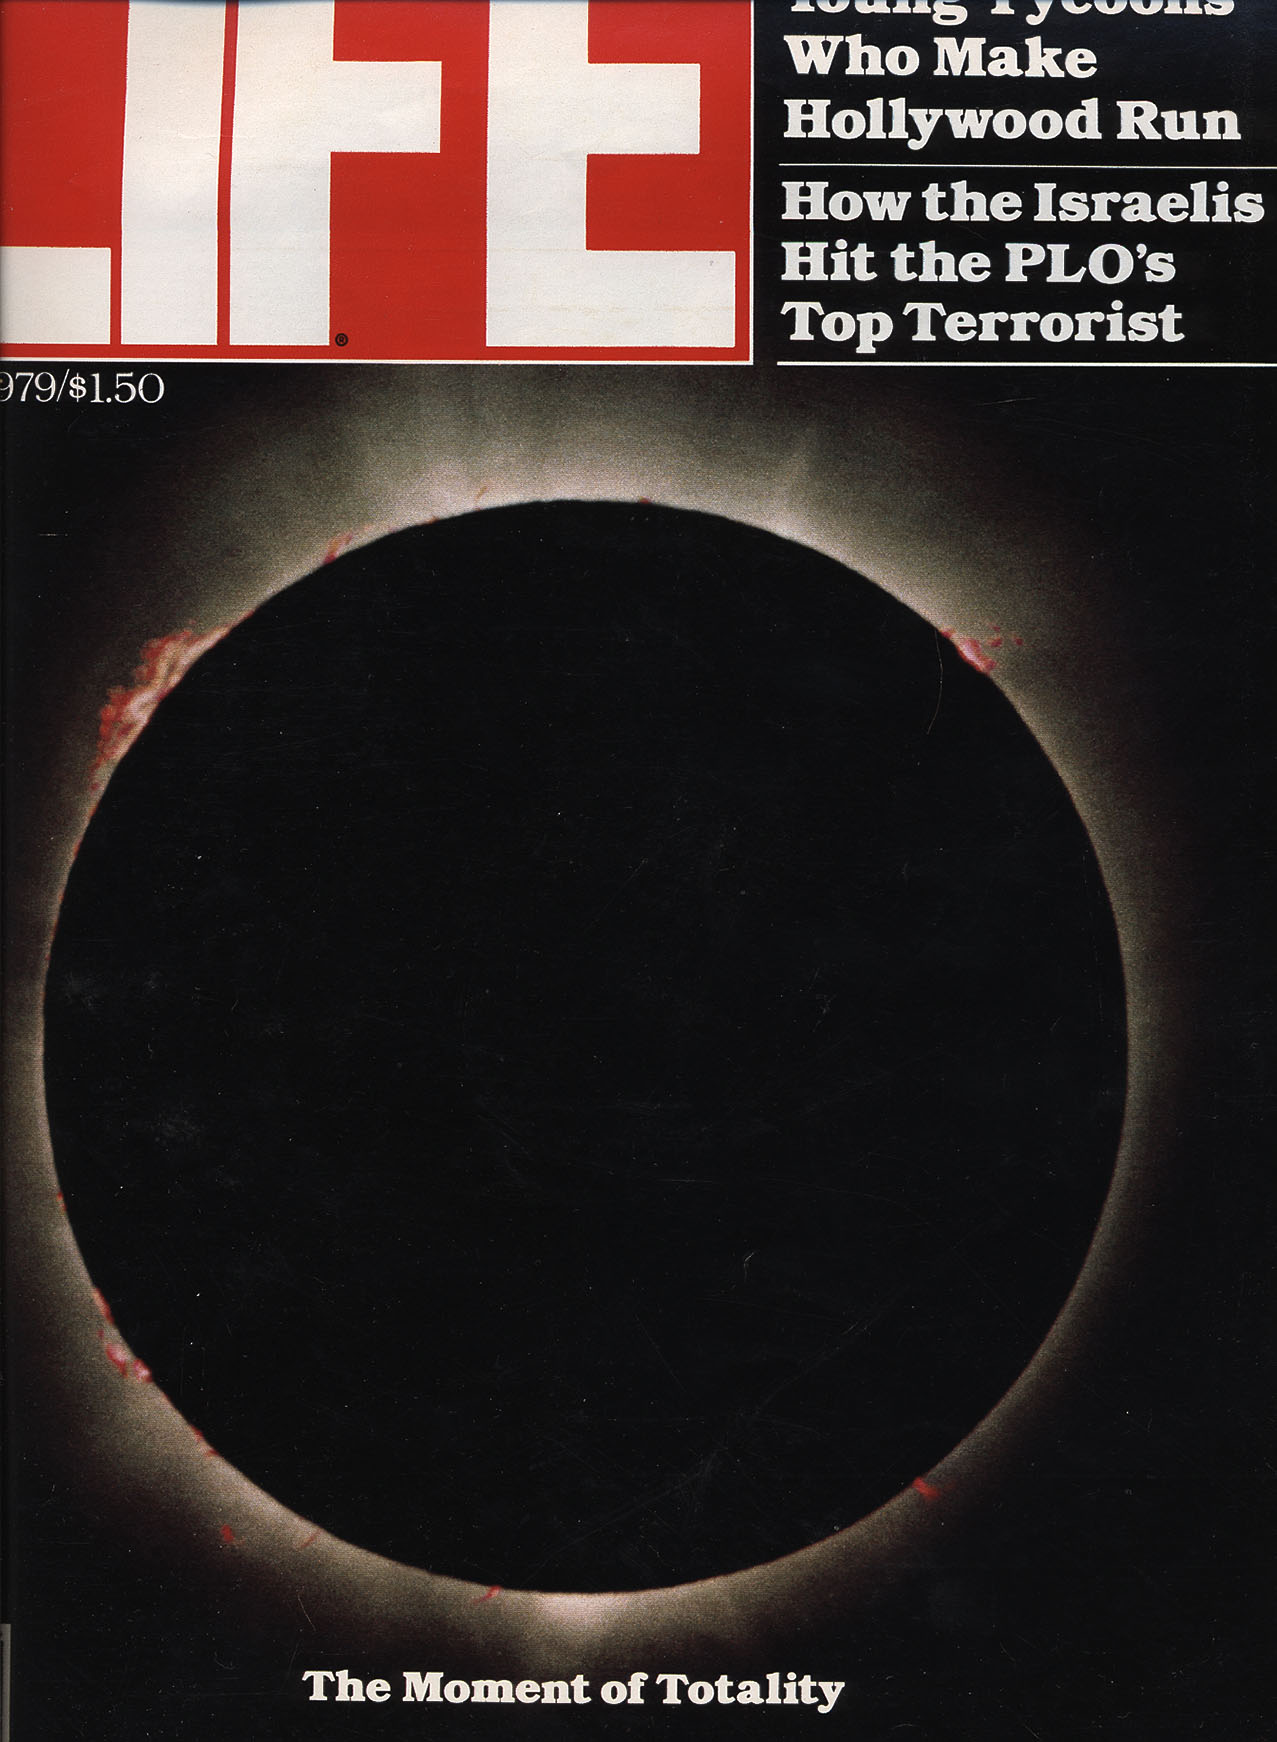 1979-Feb26-LIFE-The Moment of Totality